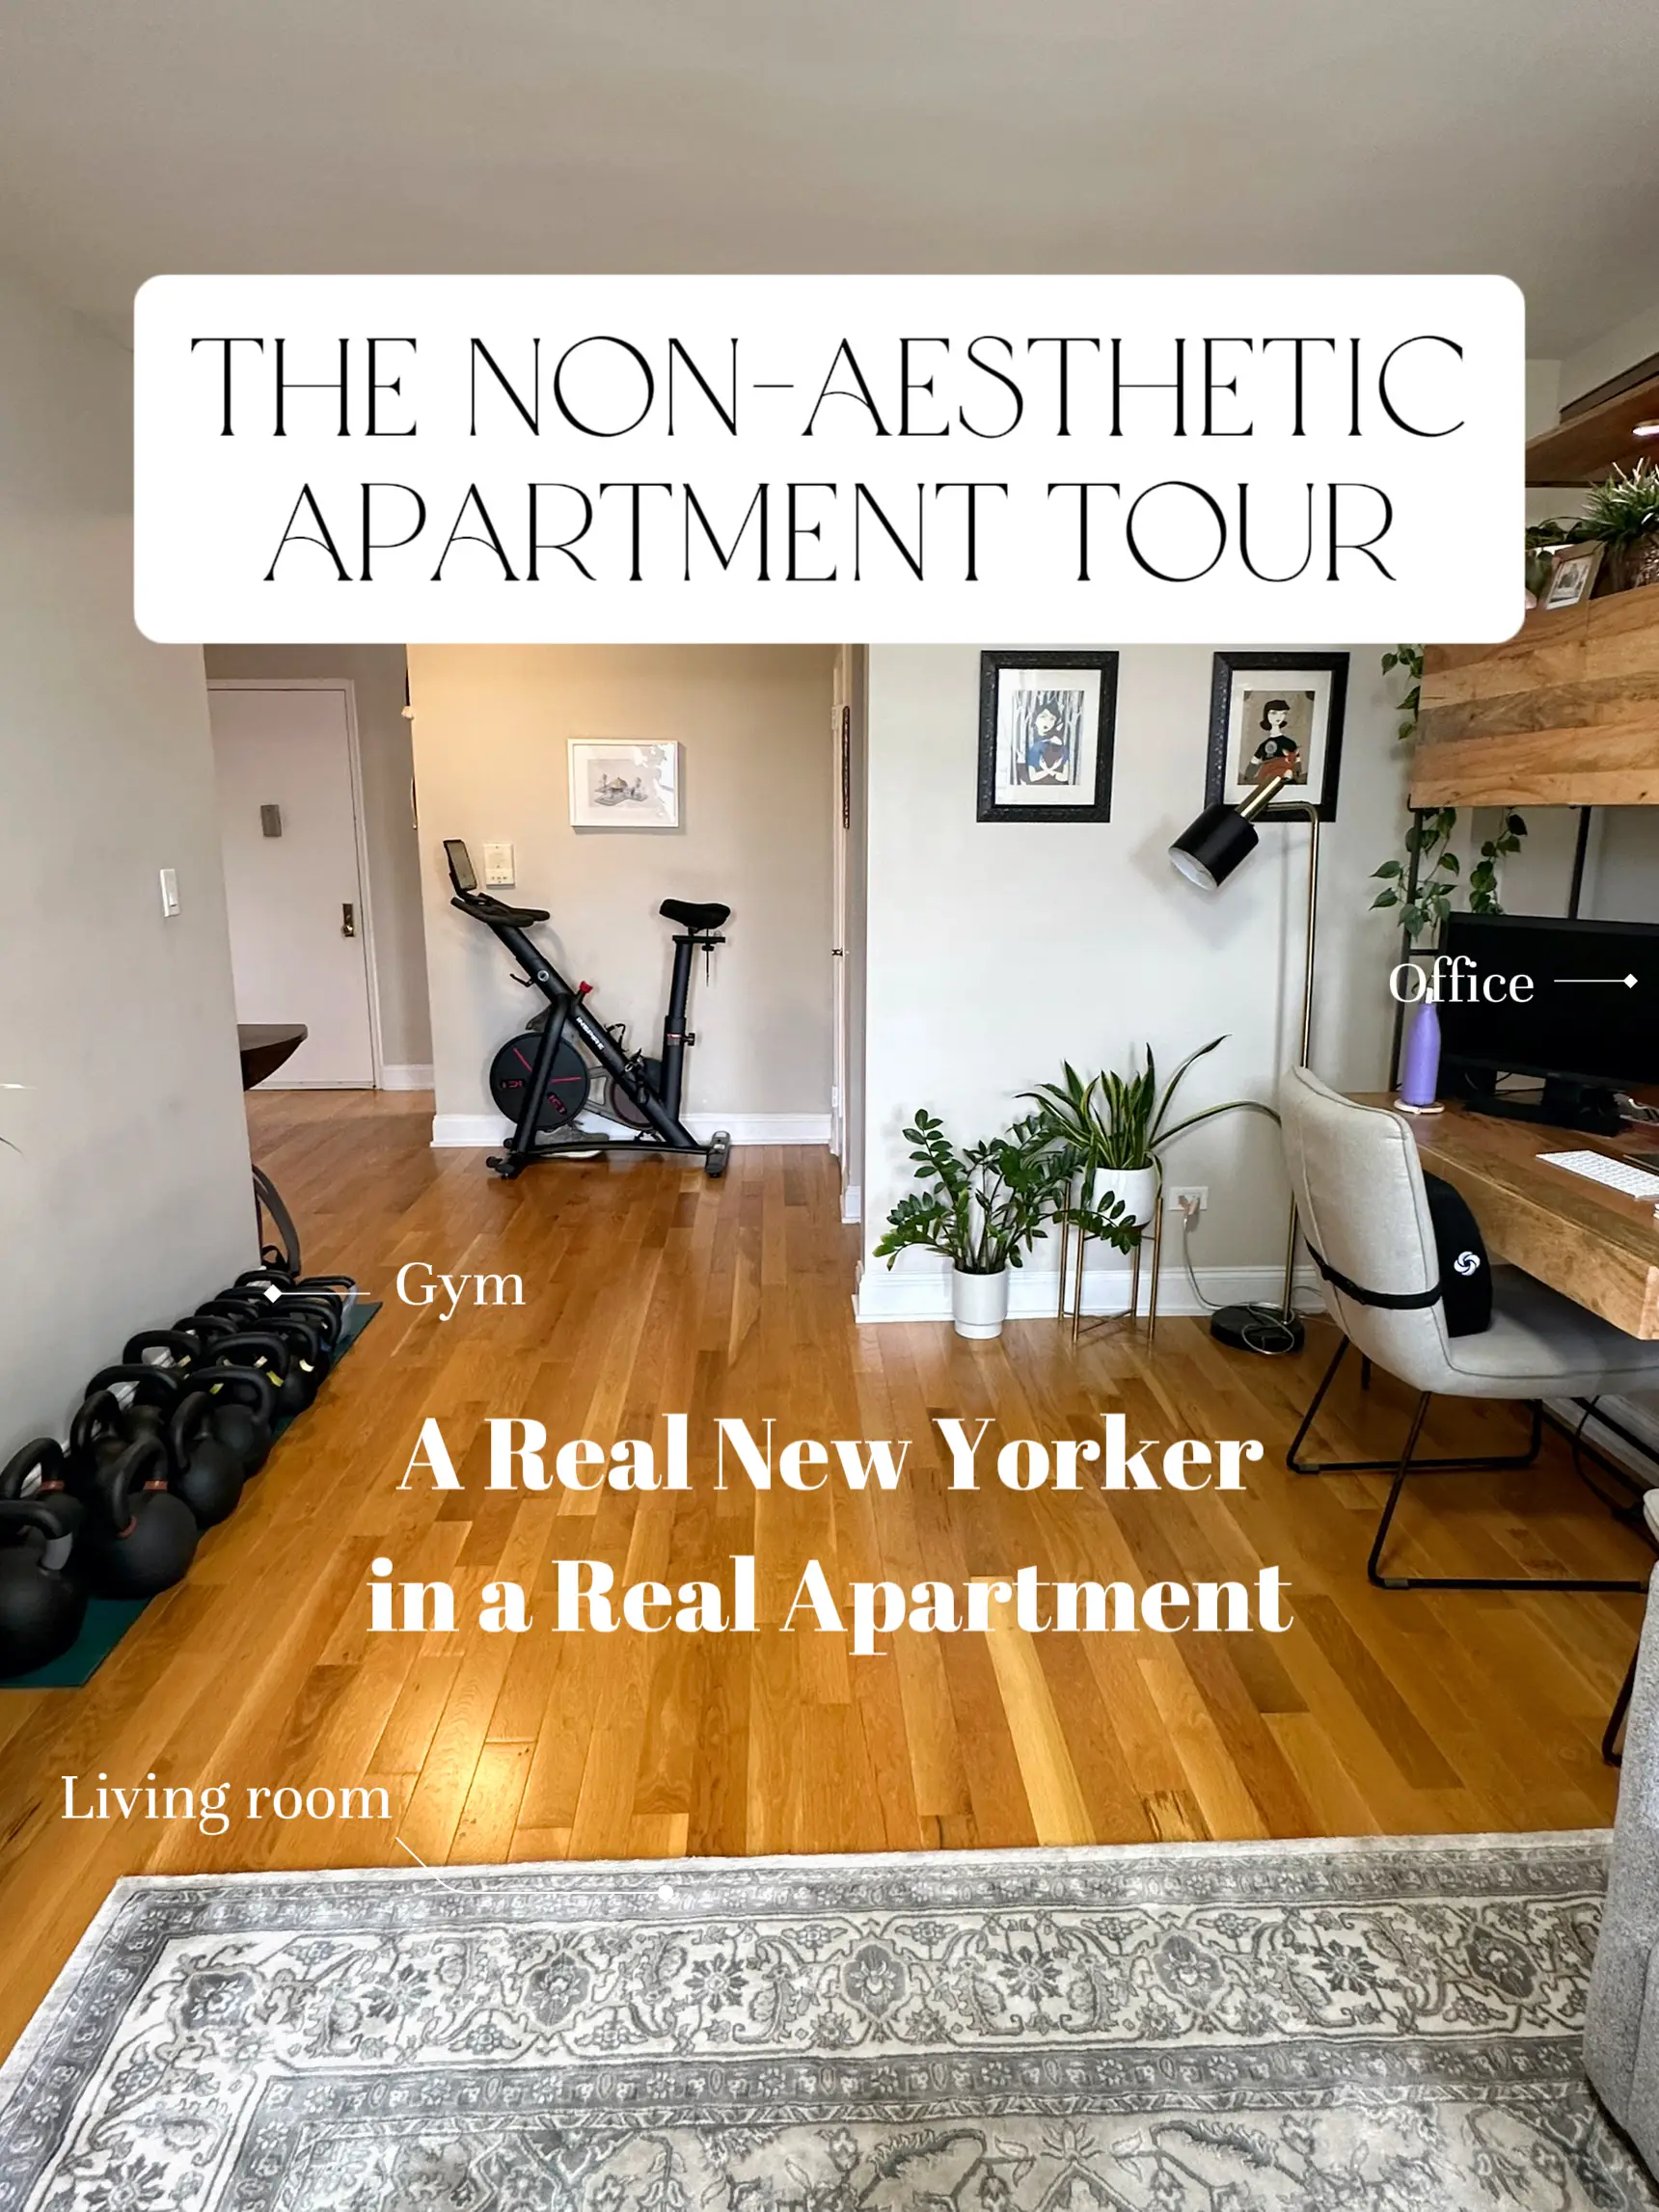 The Non-aesthetic Apartment Tour's images